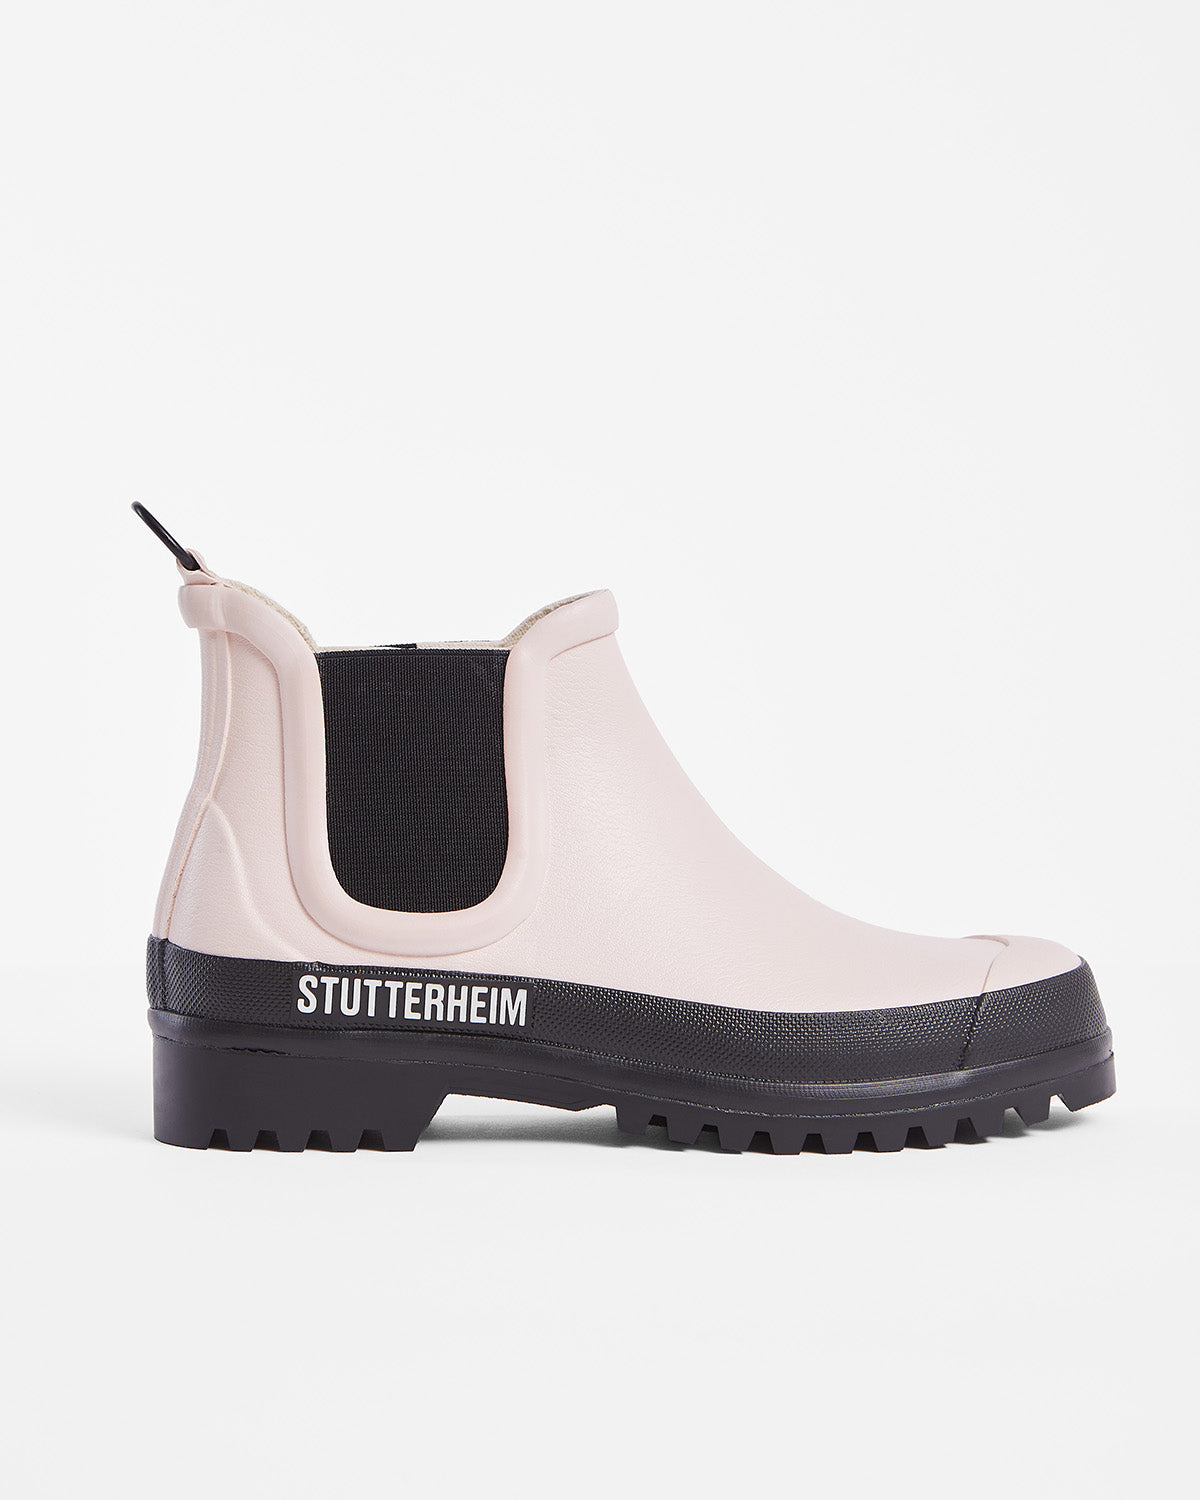 Chelsea Rainboots in color Peach with black sole by Ilse Jacobsen